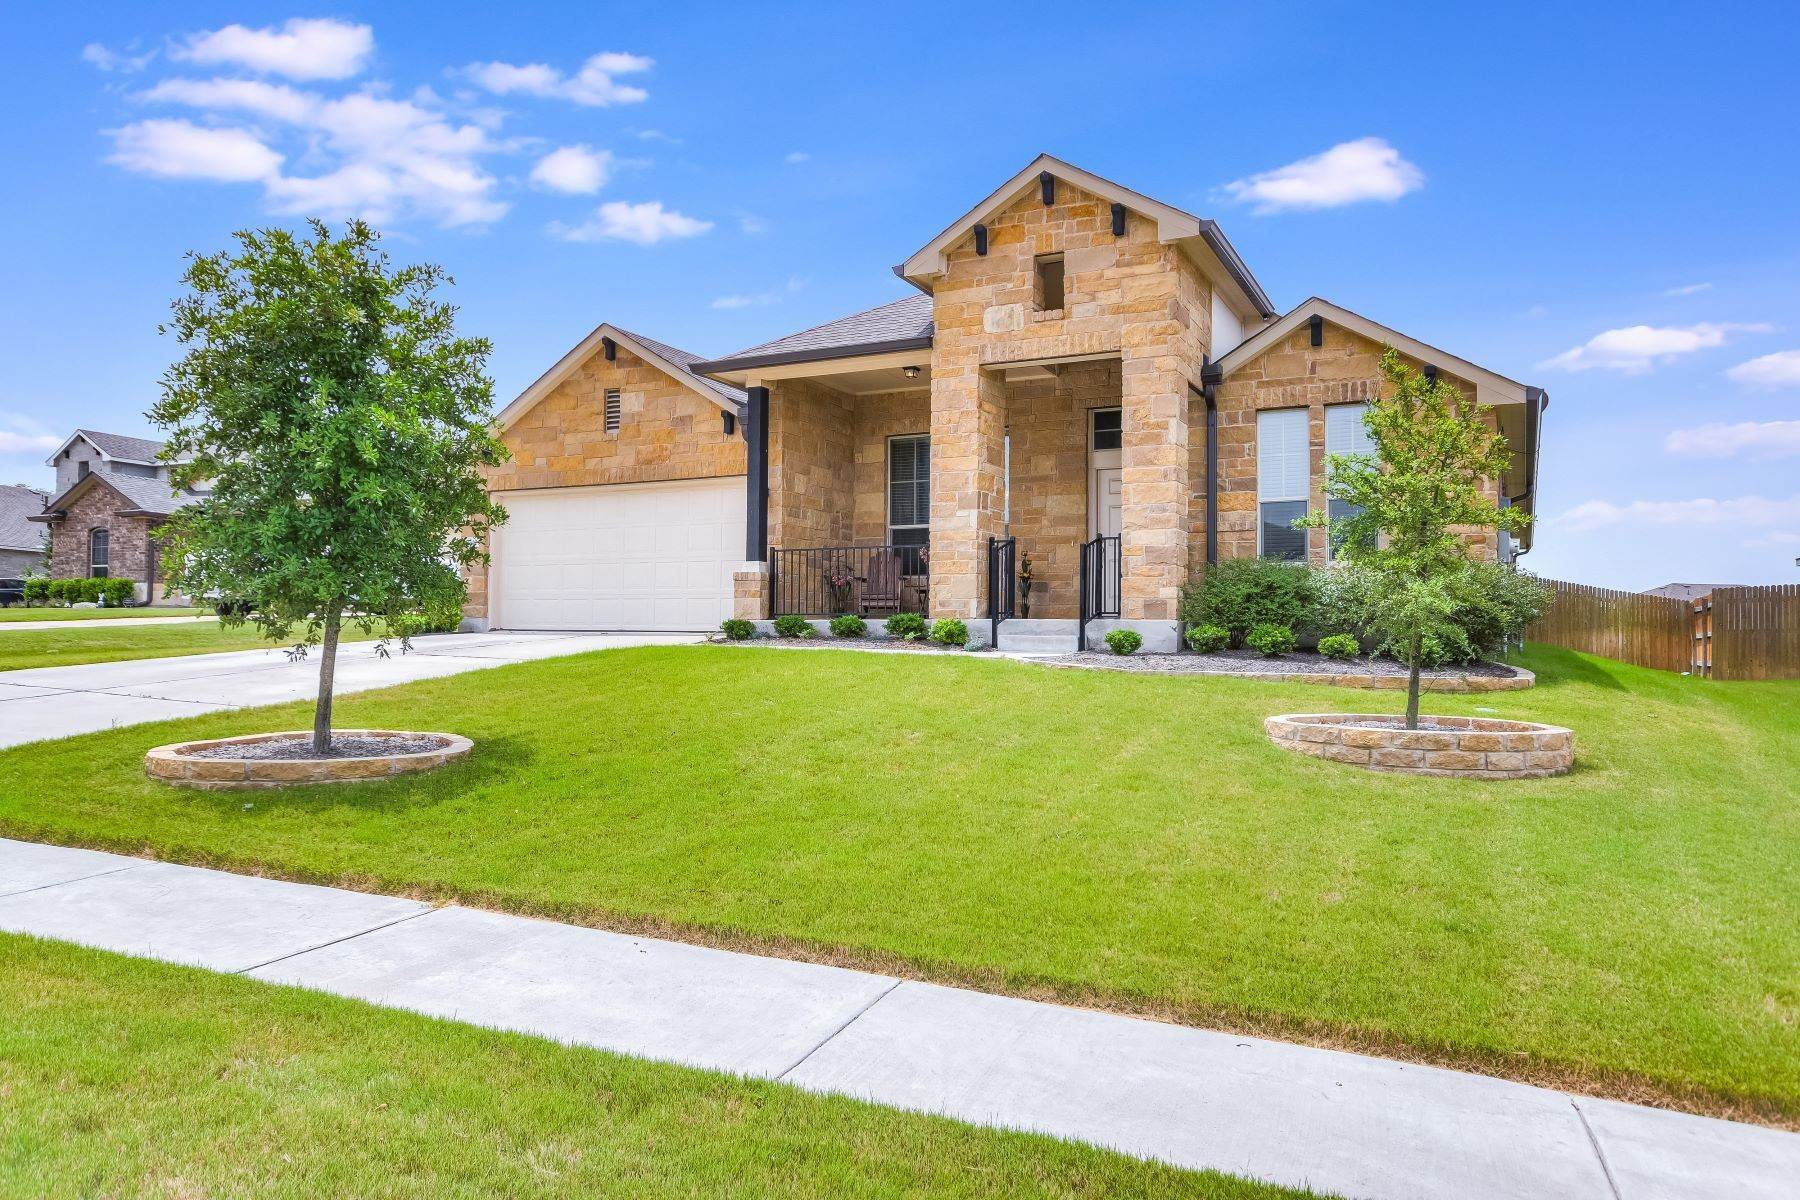 Single Family Homes for Sale at Private Home on .29 Acre Lot in Prized Location 1914 McQueeny Cove Round Rock, Texas 78664 United States